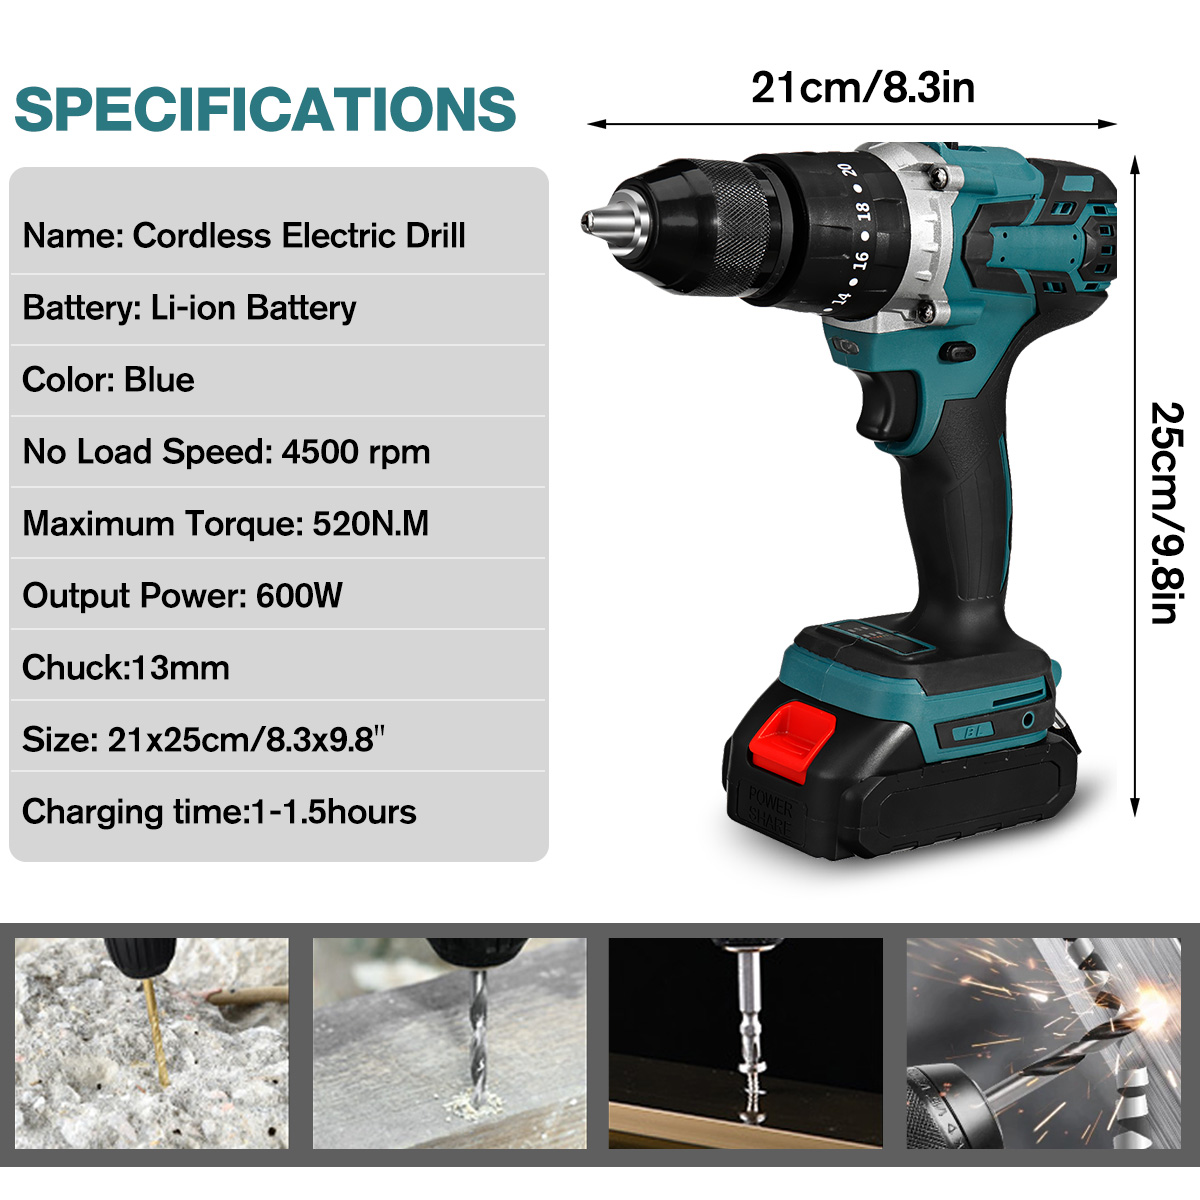 Cordless-Electric-Impact-Drill-3-in-1-Rechargeable-Drill-Screwdriver-13mm-Chuck-W-1-or-2-Li-ion-Batt-1803323-3